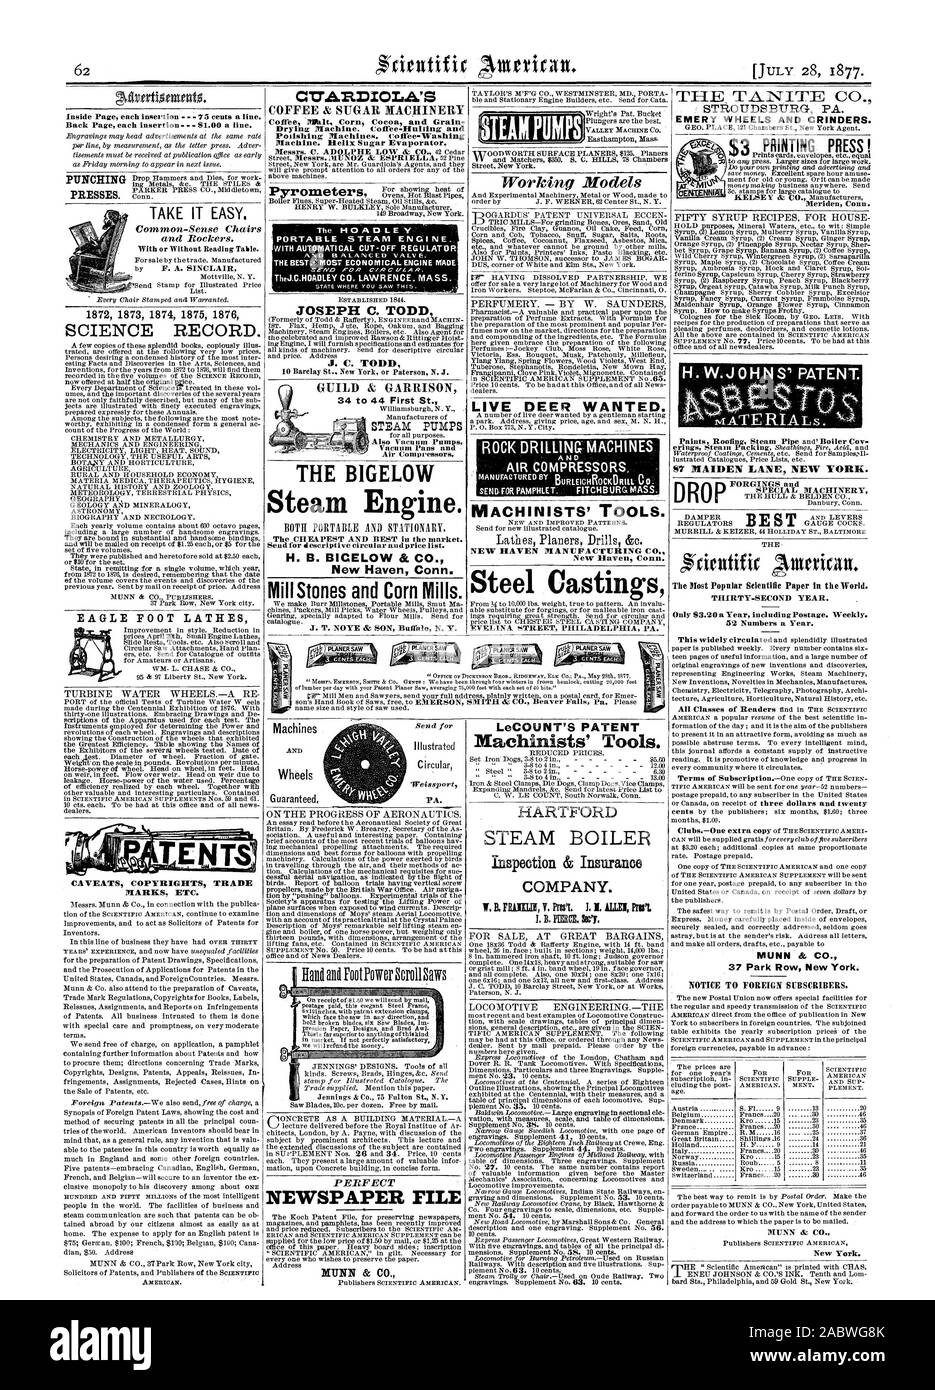 CAVEATS COPYRIGHTS TRADE MARKS ETC. AMERICAN. CUARDIOLA.'S COFFEE & SUGAR MACHINERY Coffee InFalt Corn Cocoa and Grain Drying Machine. Coffee-Hulling and Poilshing Machines. Coffee-Washing Machine. Helix Sugar Evaporator. J. T. NOYE & SON Buffal N. Y. Machines AND Wheels Guaranteed. PA. NEWSPAPER FILE MUNN & CO. LeCOUNT'S PATENT Machinists' Tools. HARI FORD COMPANY. STROUDSBURG PA. EMERY WHEELS AND GRINDERS. FIFTY SYRUP RECIPES FOR HOUSE DROP FORGINGS and SPECIAL MACHINERY The Most Popular Scientific Paper in the World. THIRTY-SECOND YEAR. Only 63.20 a Year including Postage. Weekly. 52 Stock Photo